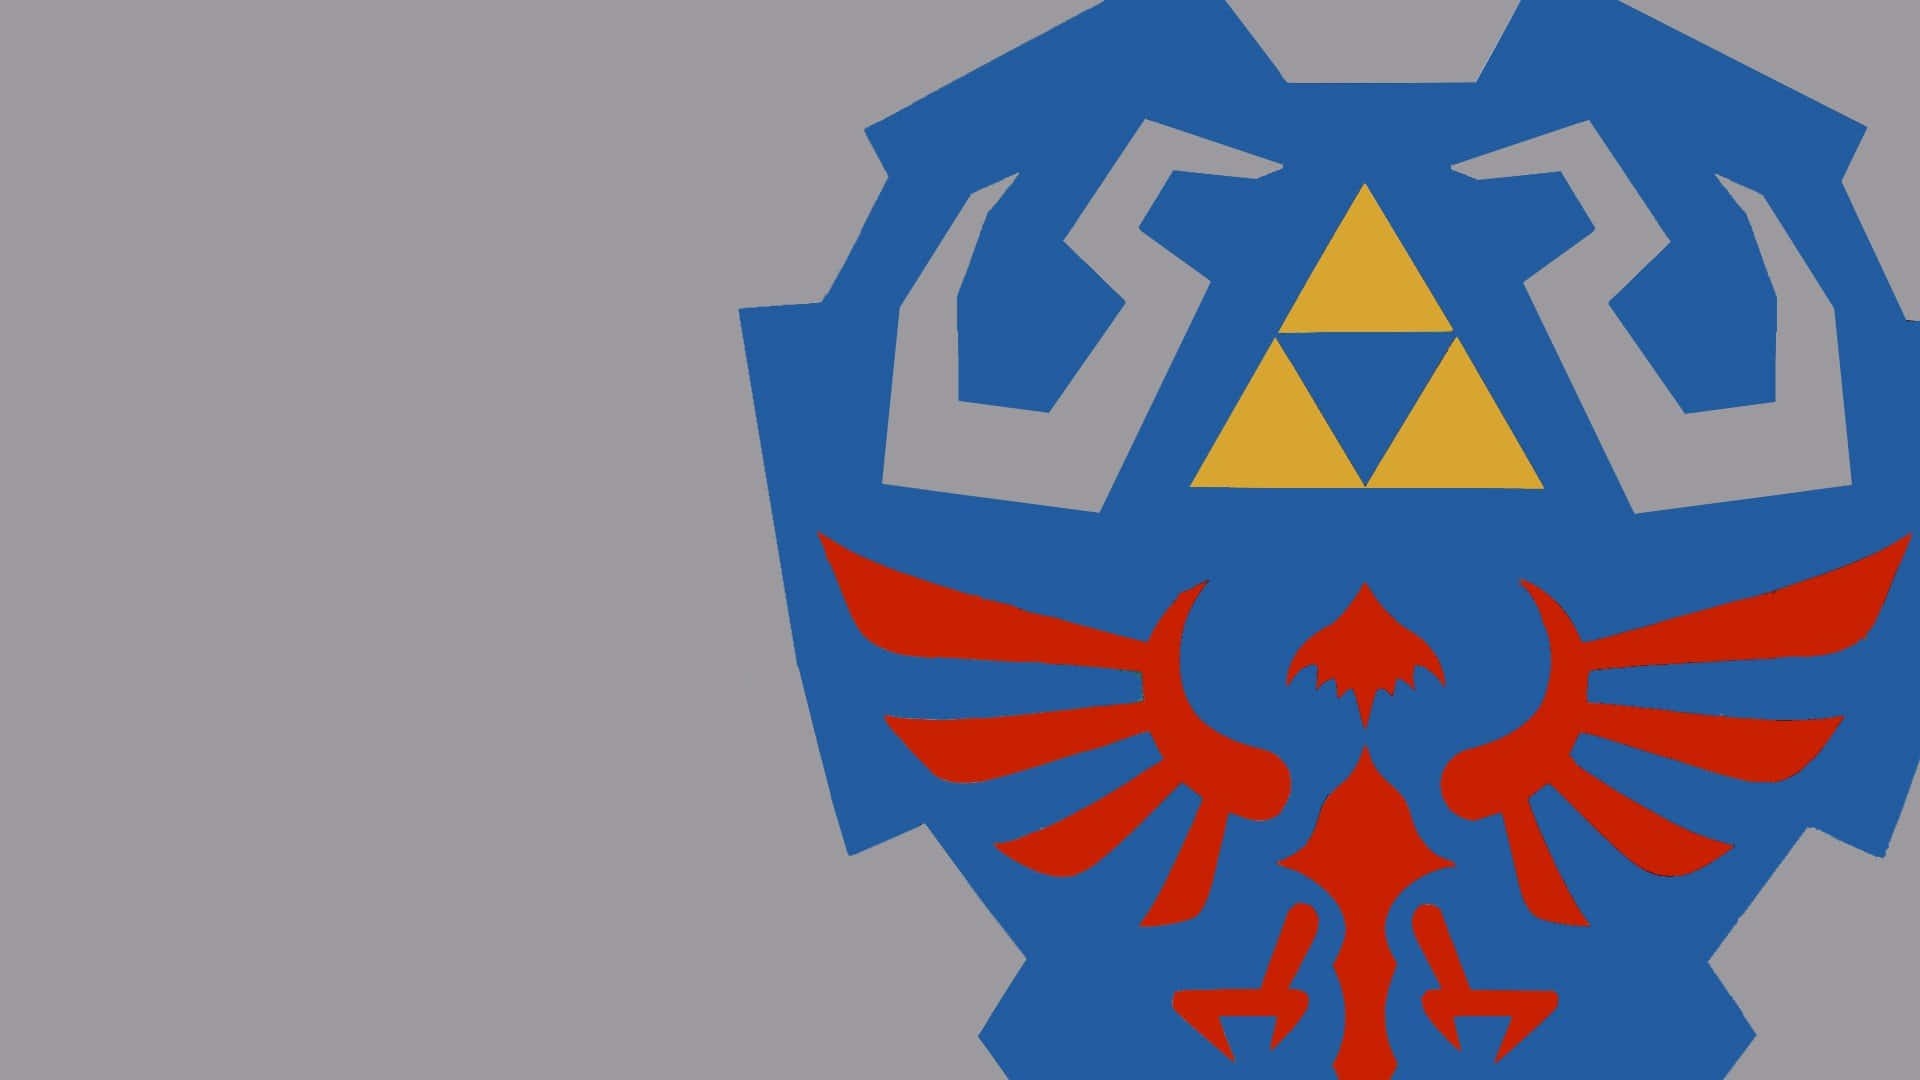 The Legendary Triforce Of Power, Wisdom, And Courage